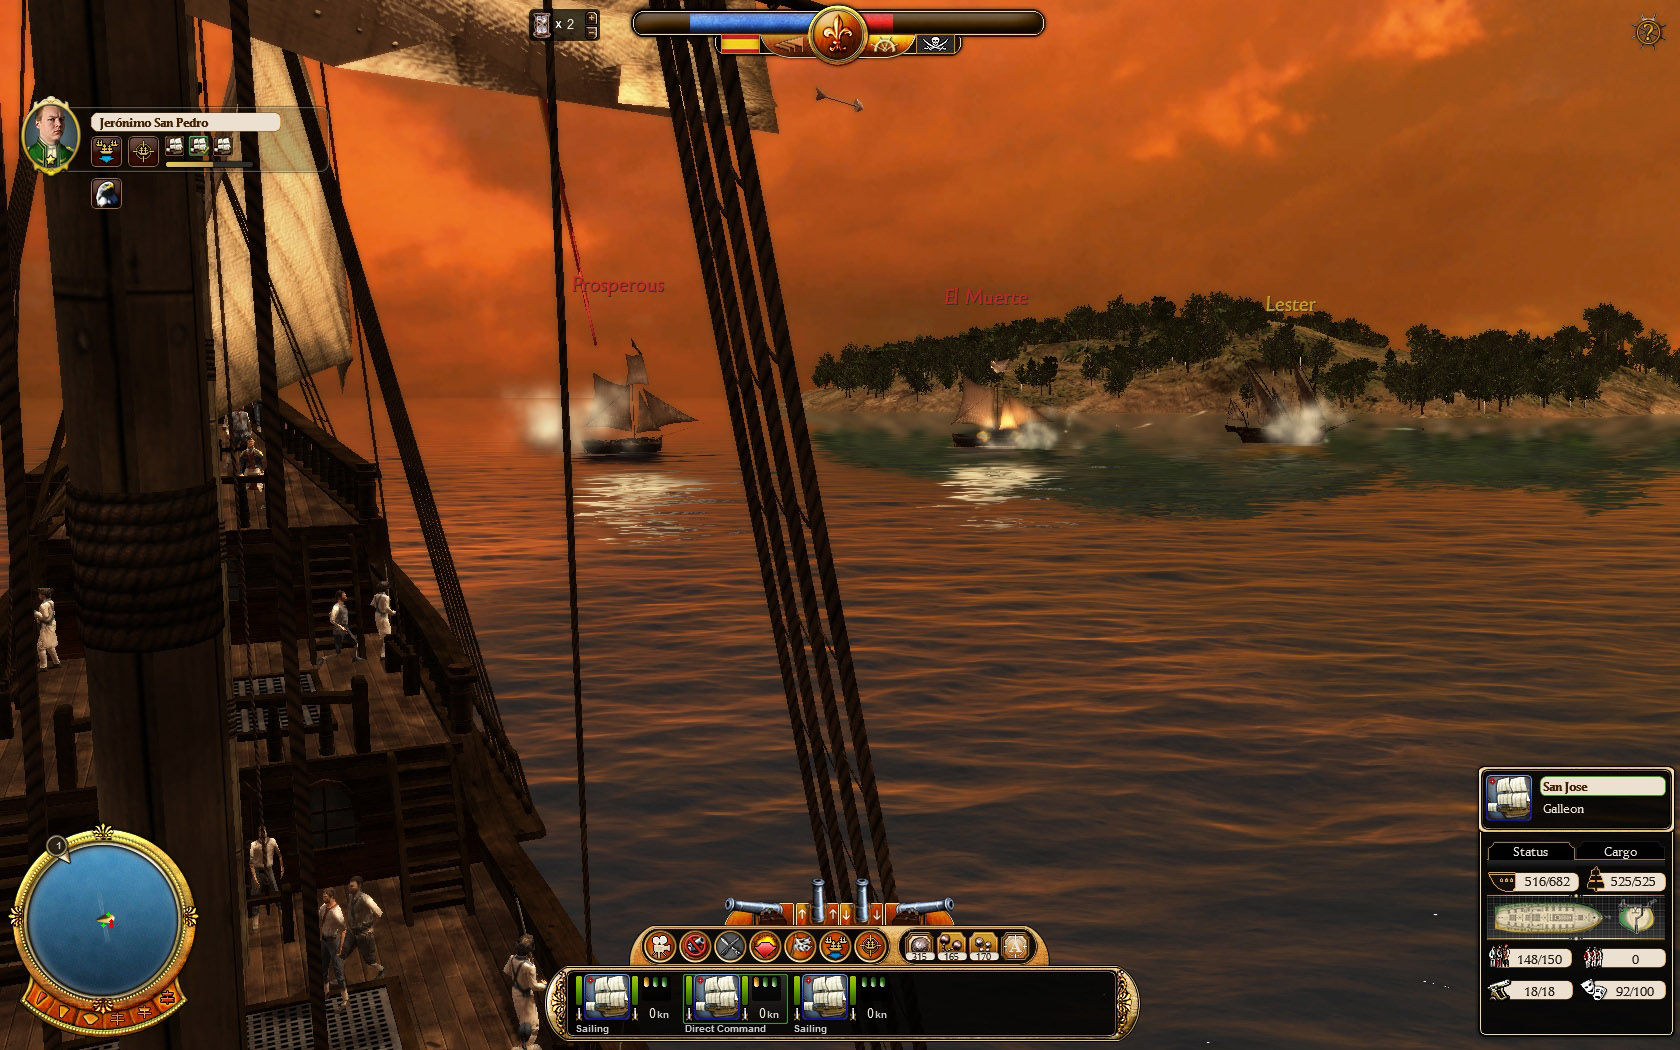 Commander: Conquest of the Americas - Pirate Treasure Chest Featured Screenshot #1